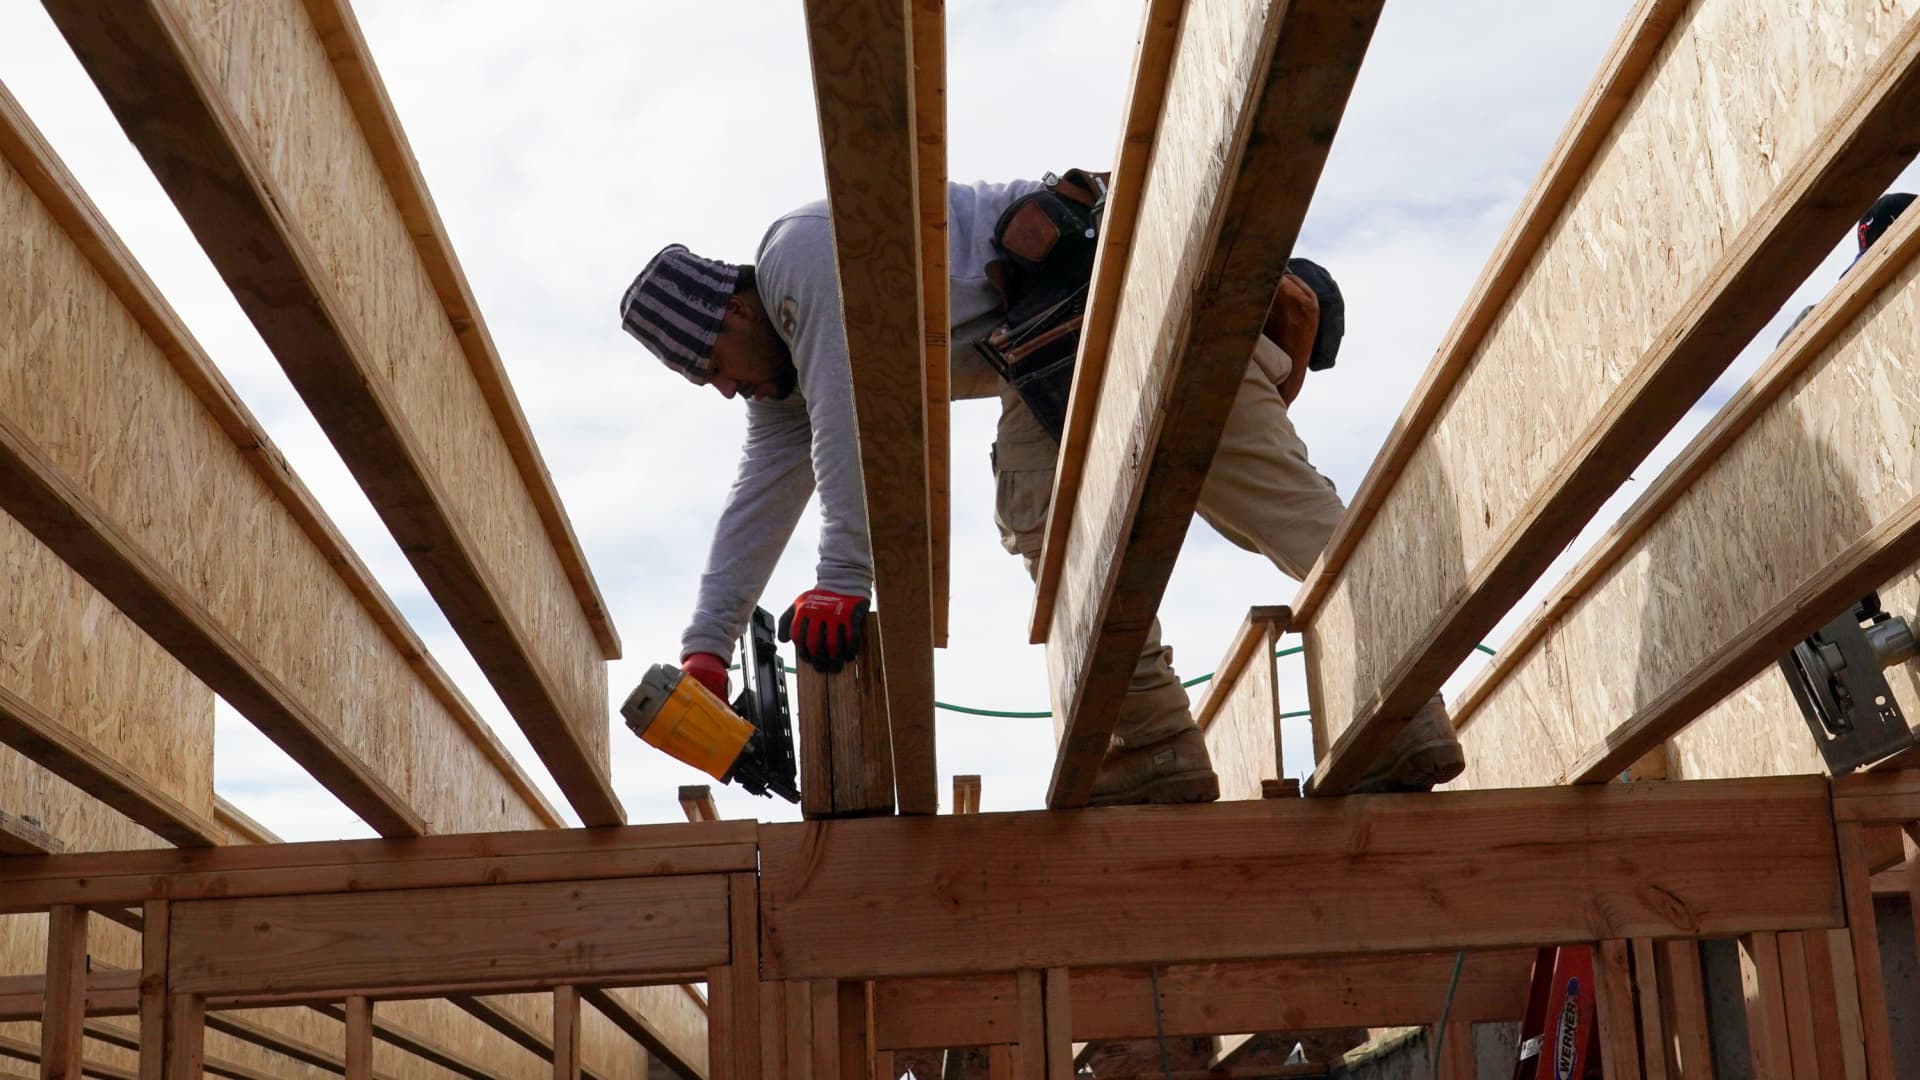 Homebuilders say U.S. is in a ‘housing recession’ as sentiment turns negative